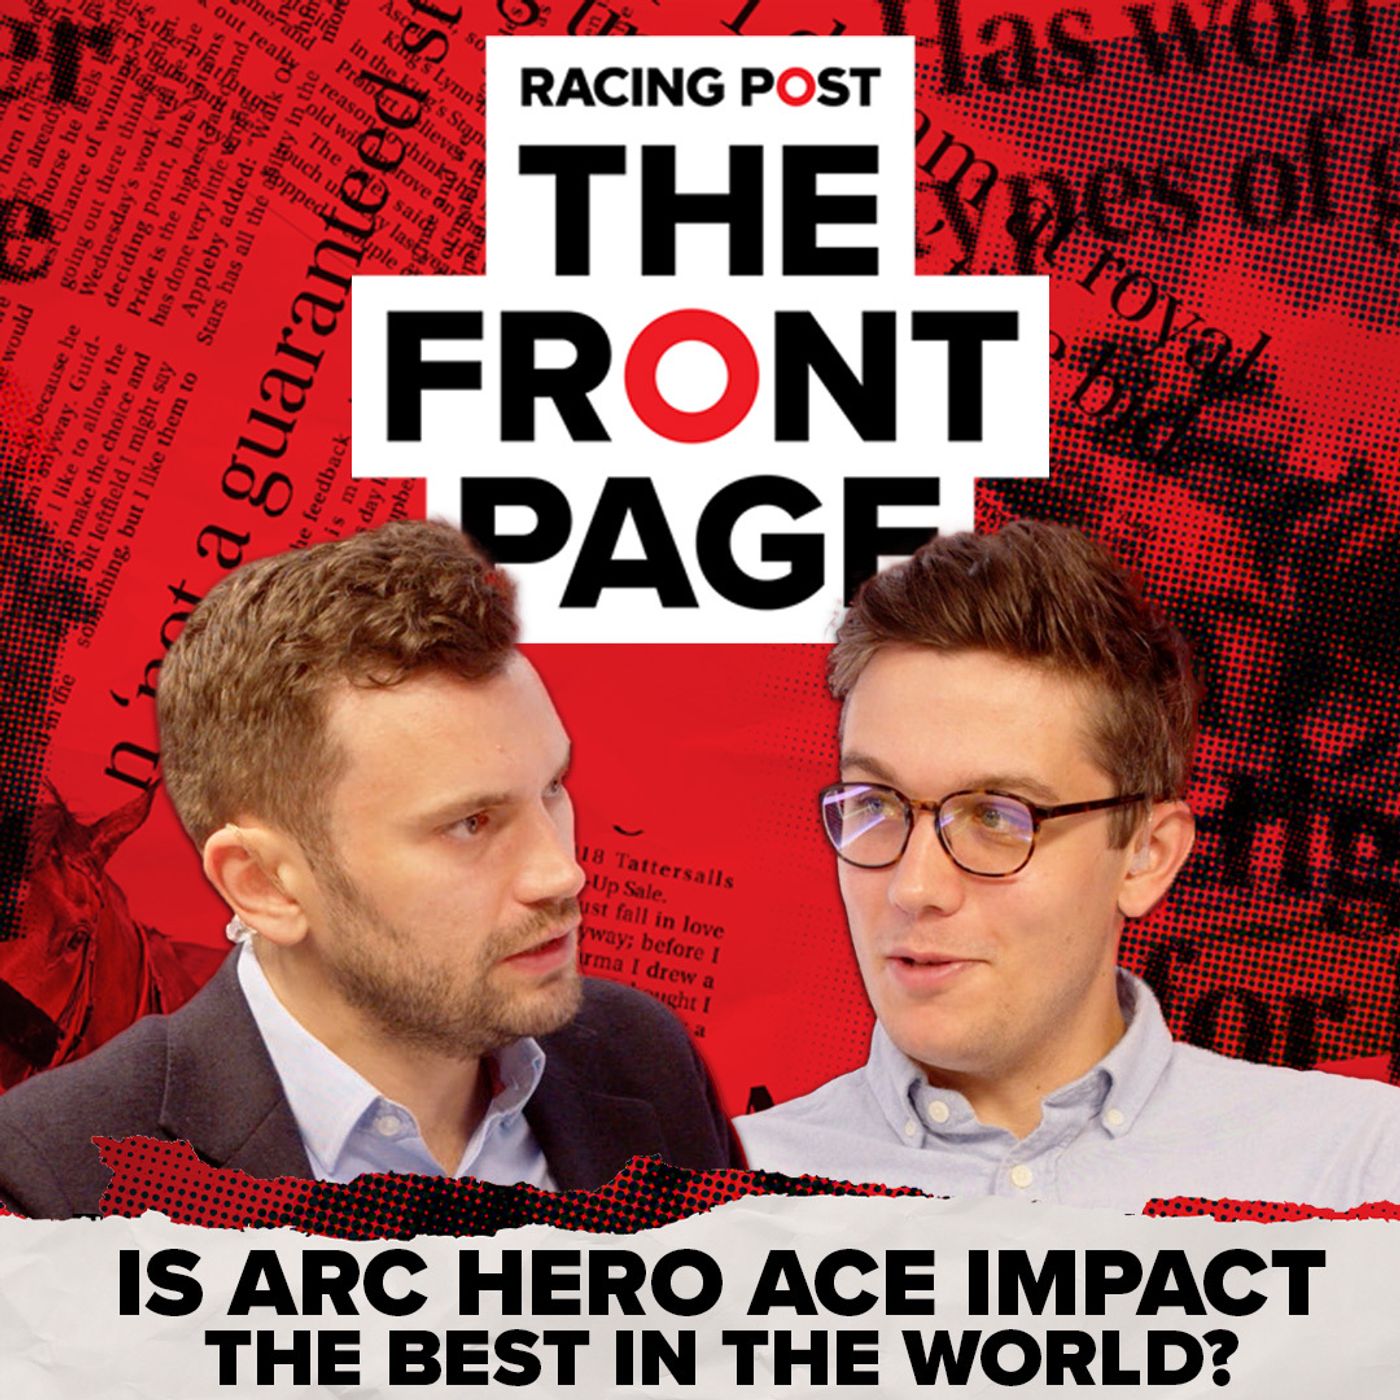 110: Is Arc hero ACE IMPACT the best in the world? | The Front Page | Horse Racing News